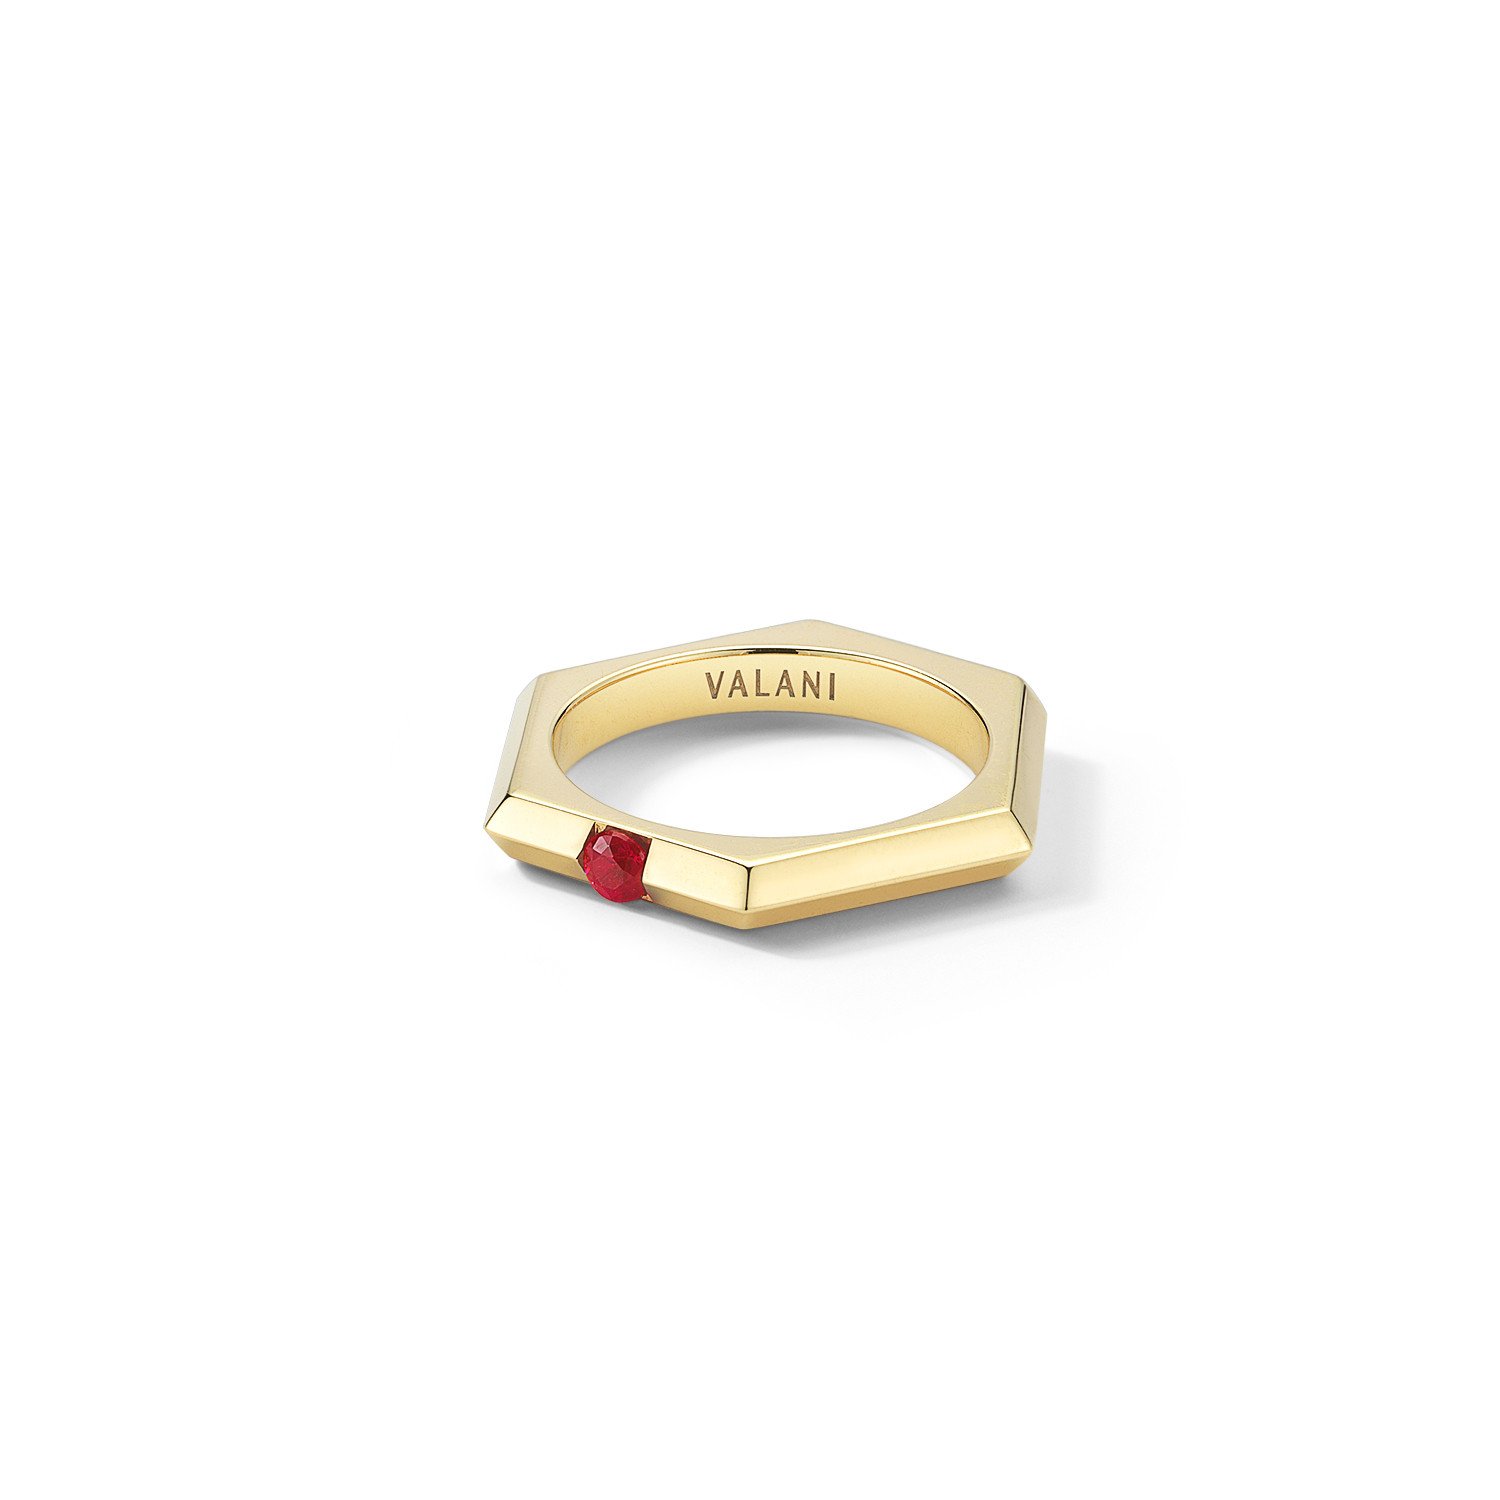 Hexa I Ruby Ring by Valani Atelier. 18K Yellow Gold and Ruby